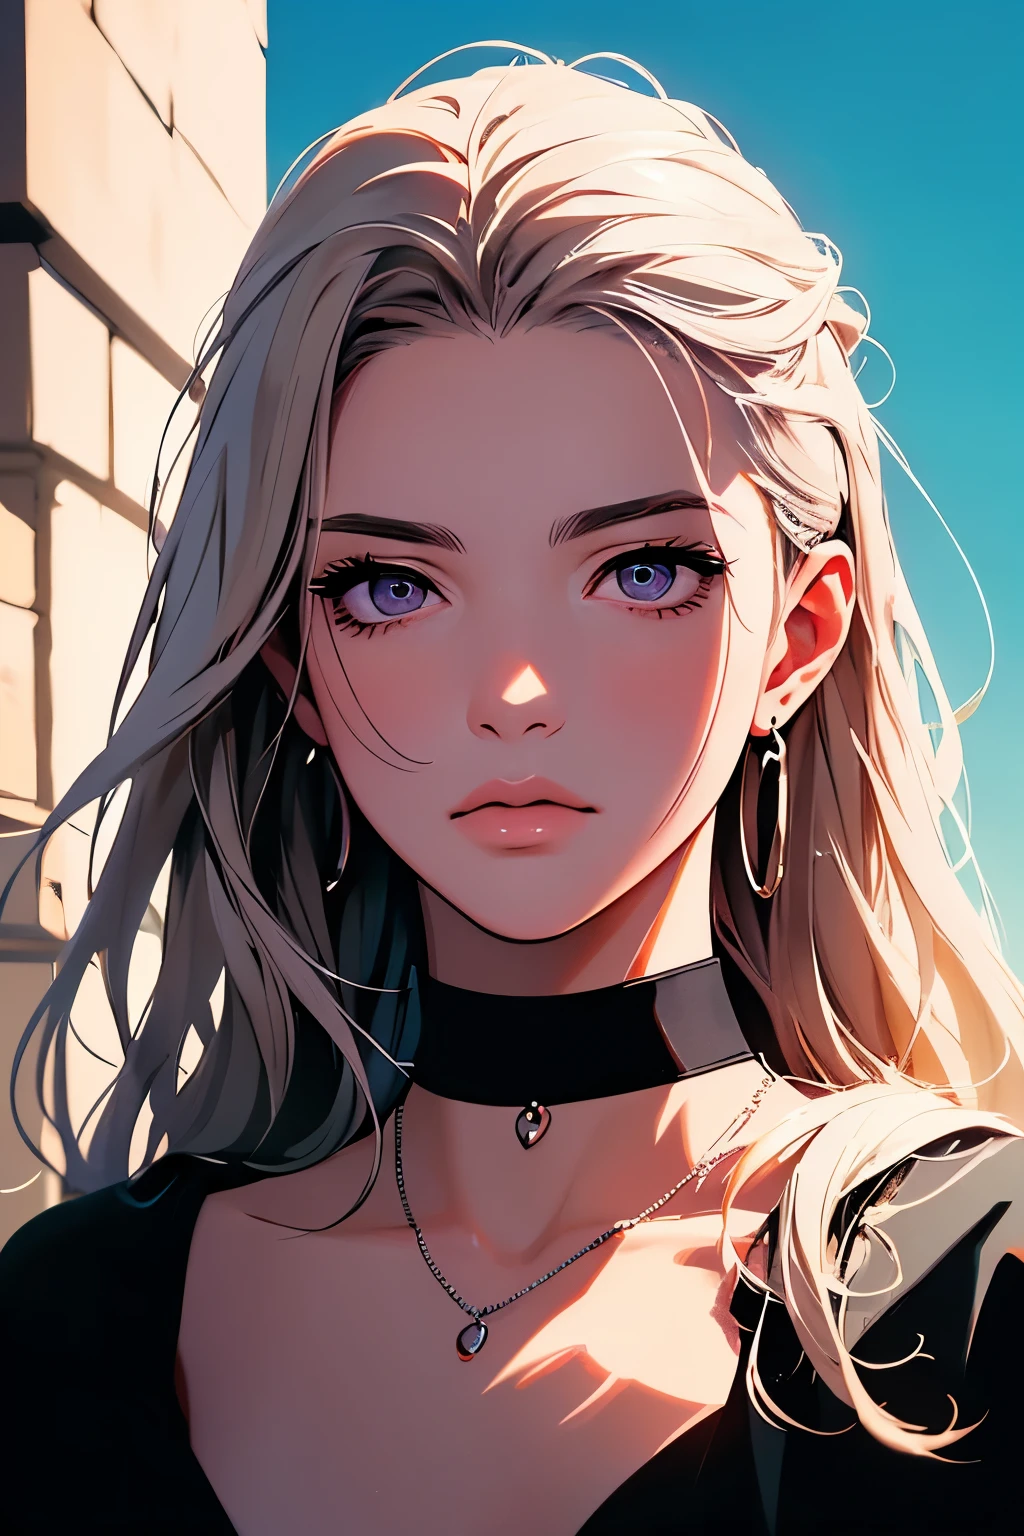 2d illustration, anime, a painting portrait in fine arts, in manhwa style, Bishamon from noragami, 1girl, blond long hair, big hair, curly hair, purple eyes, makeup, beautiful, high definition, masterpiece, best quality, high detail, high detailed eyes, grain filter, Detailed lips, high resolution, ultra-detalhado, retrato, mulher caucasiana, realista proportions, Anatomicamente preciso, bochechas rosadas; dark lighting, alta qualidade, premiado, high resolution, 8k,, summer, lascivo, film grain, Ilford HP5, 80mm, strong soman, confident, matching necklace (choker) and earrings, rindo, divertida, olhar penetrante, de frene para a camera, Braided hair